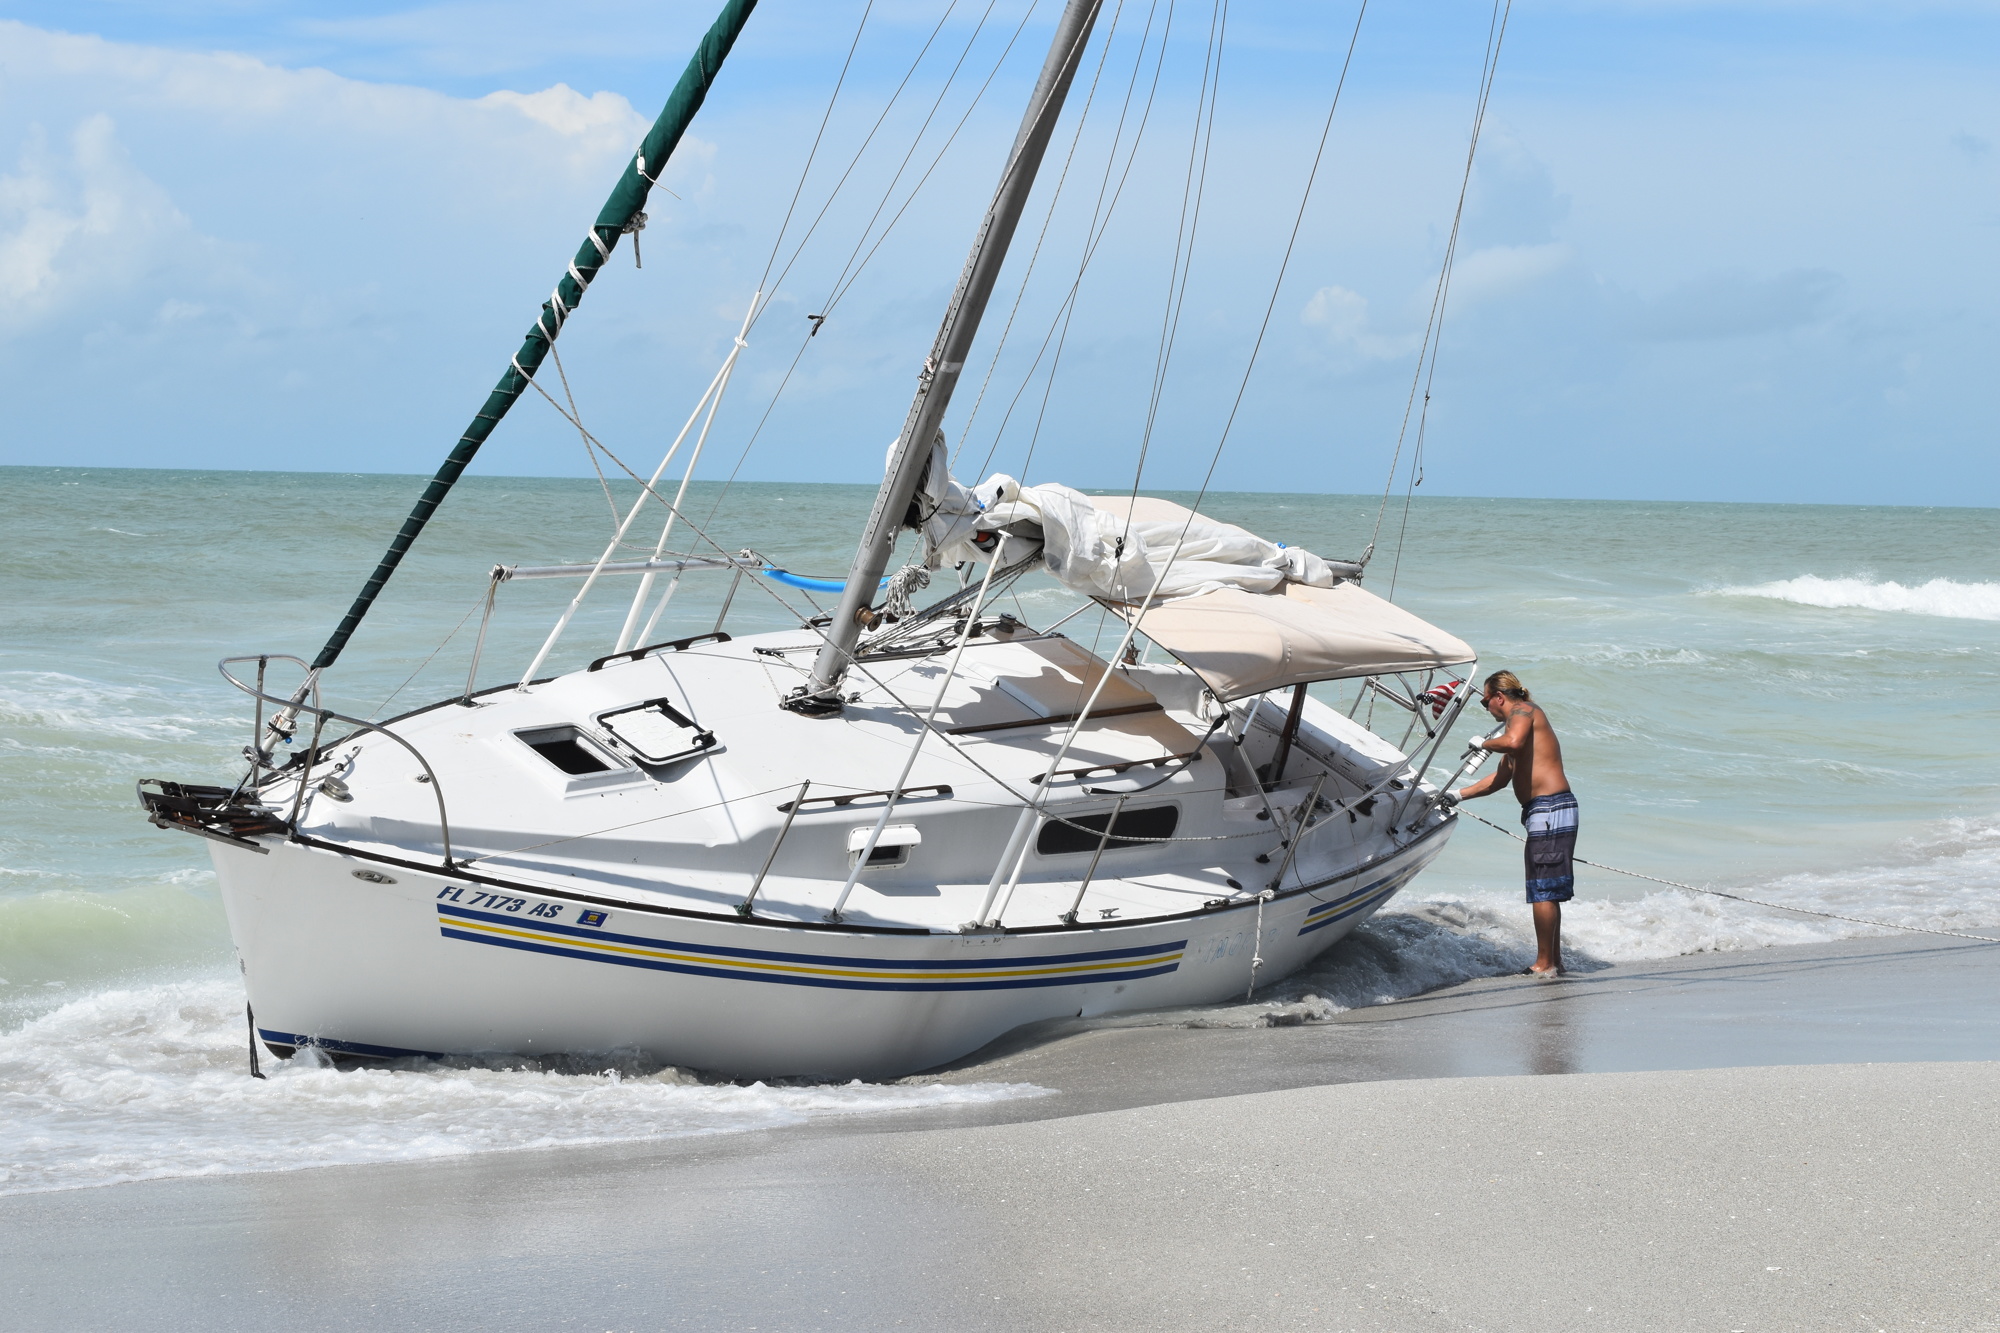 Mark Sternal examines his sailboat washed ashore near 4239 Gulf of Mexico Drive in Longboat Key, Florida.